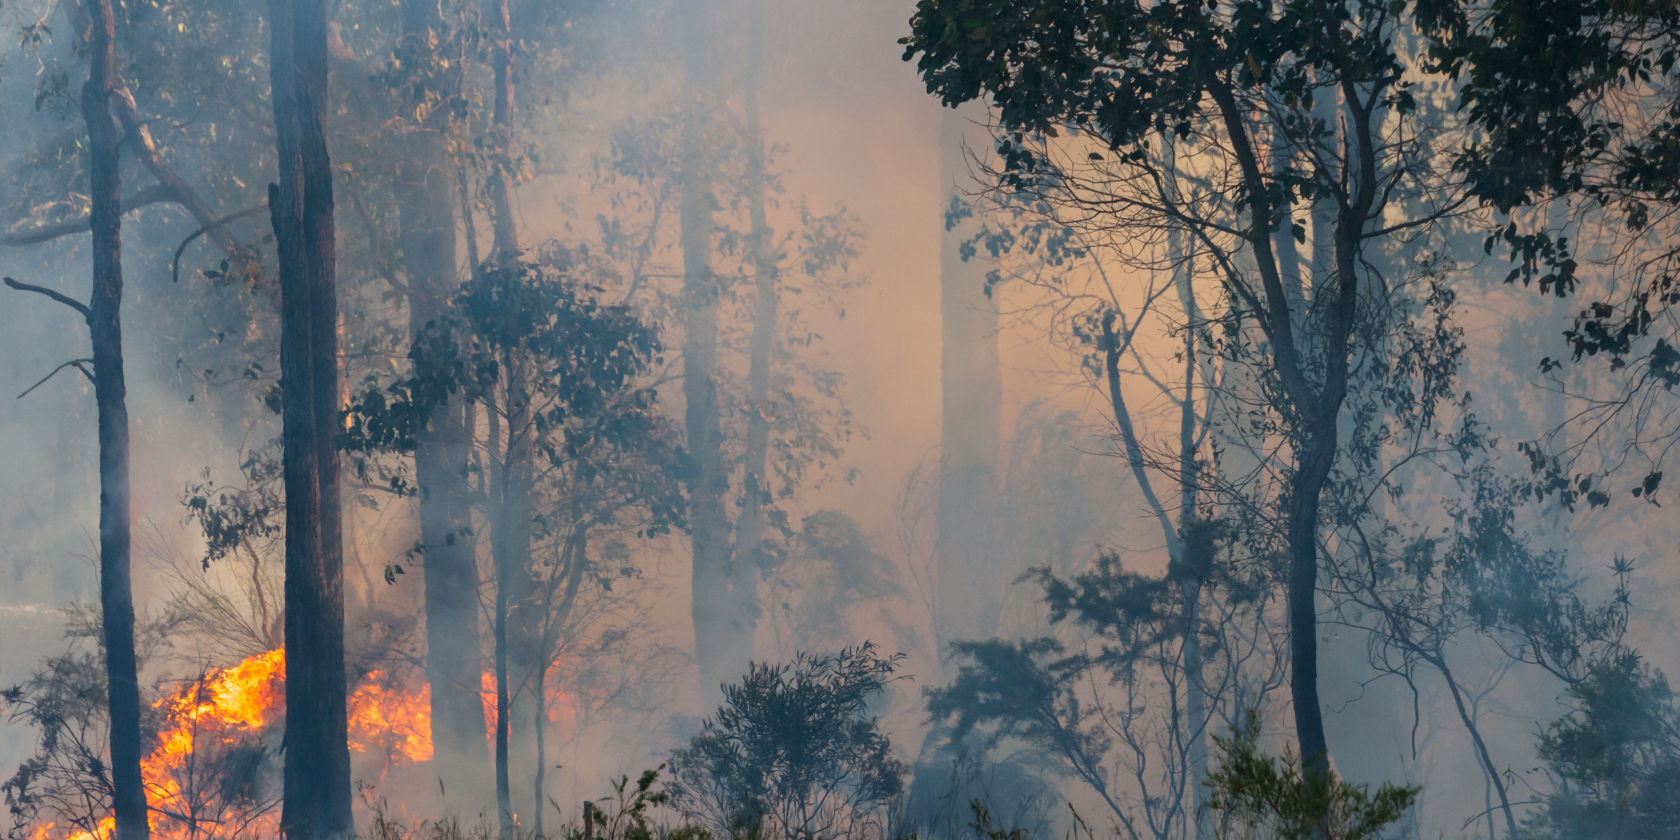 Financial assistance package to help bushfire affected customers